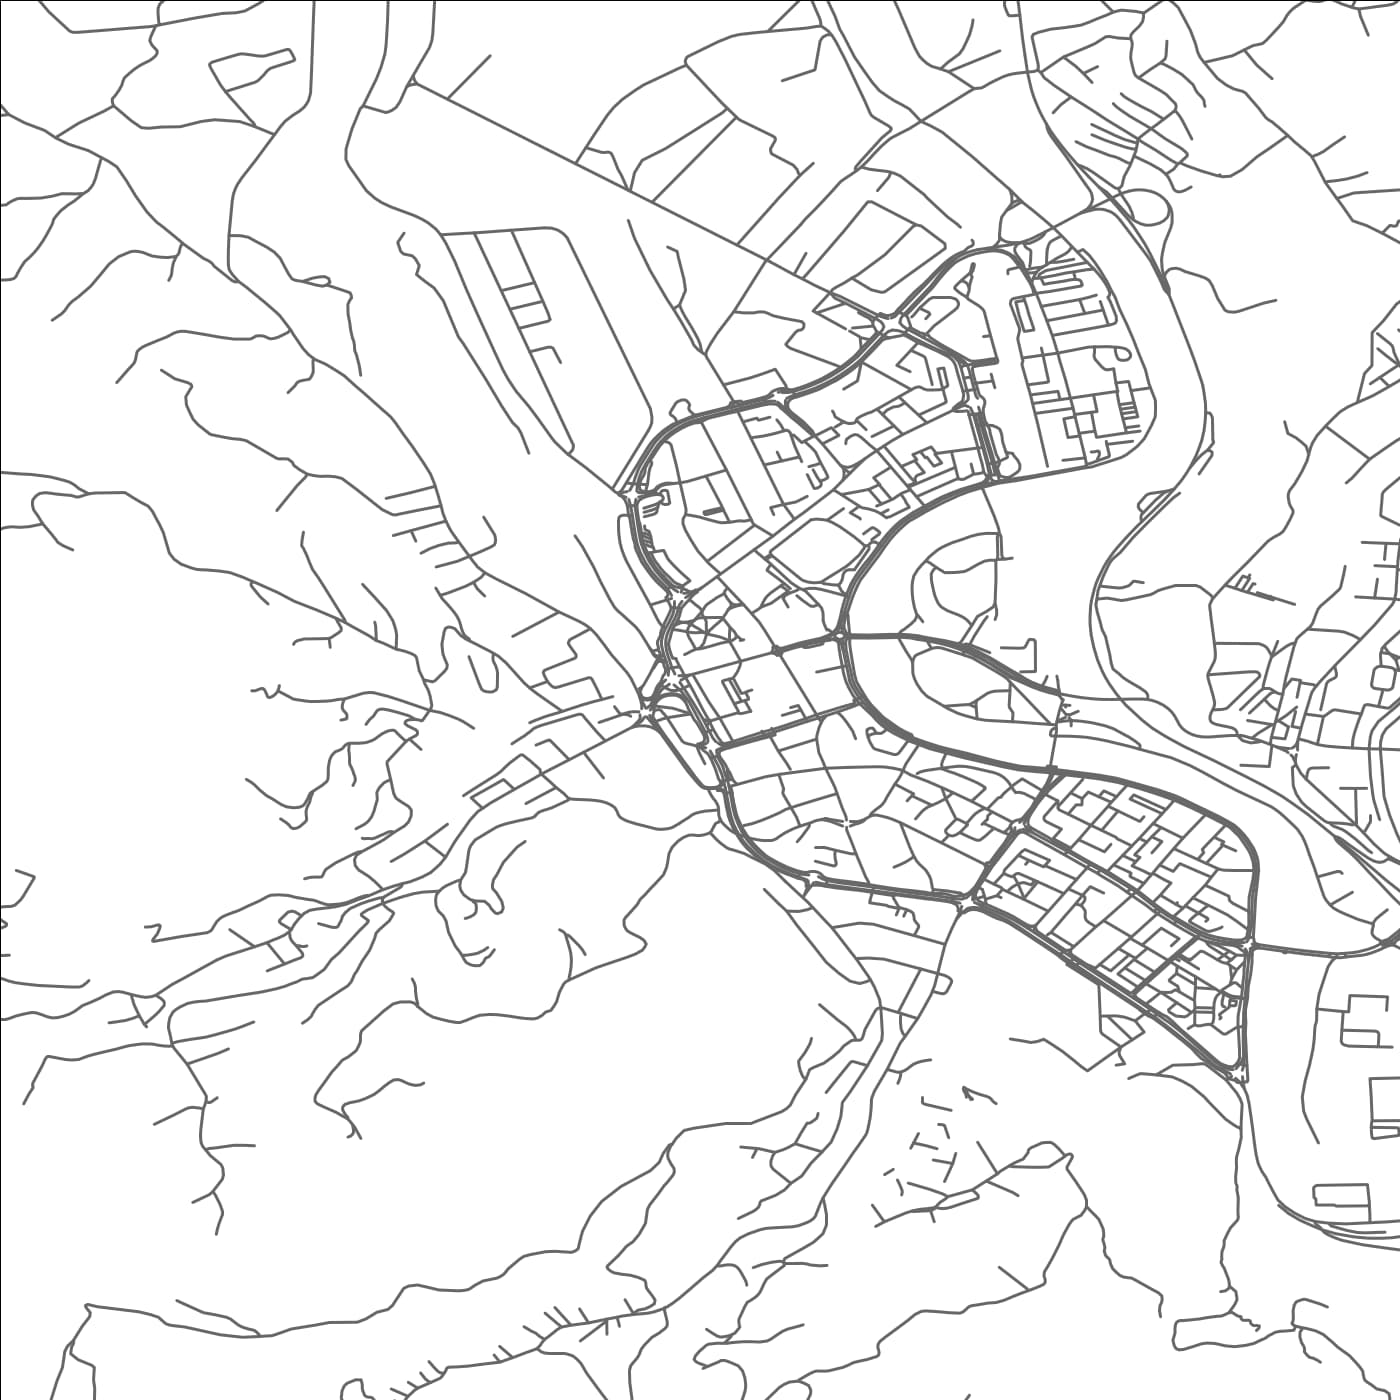 ROAD MAP OF ZENICA, BOSNIA AND HERZEGOVINA BY MAPBAKES